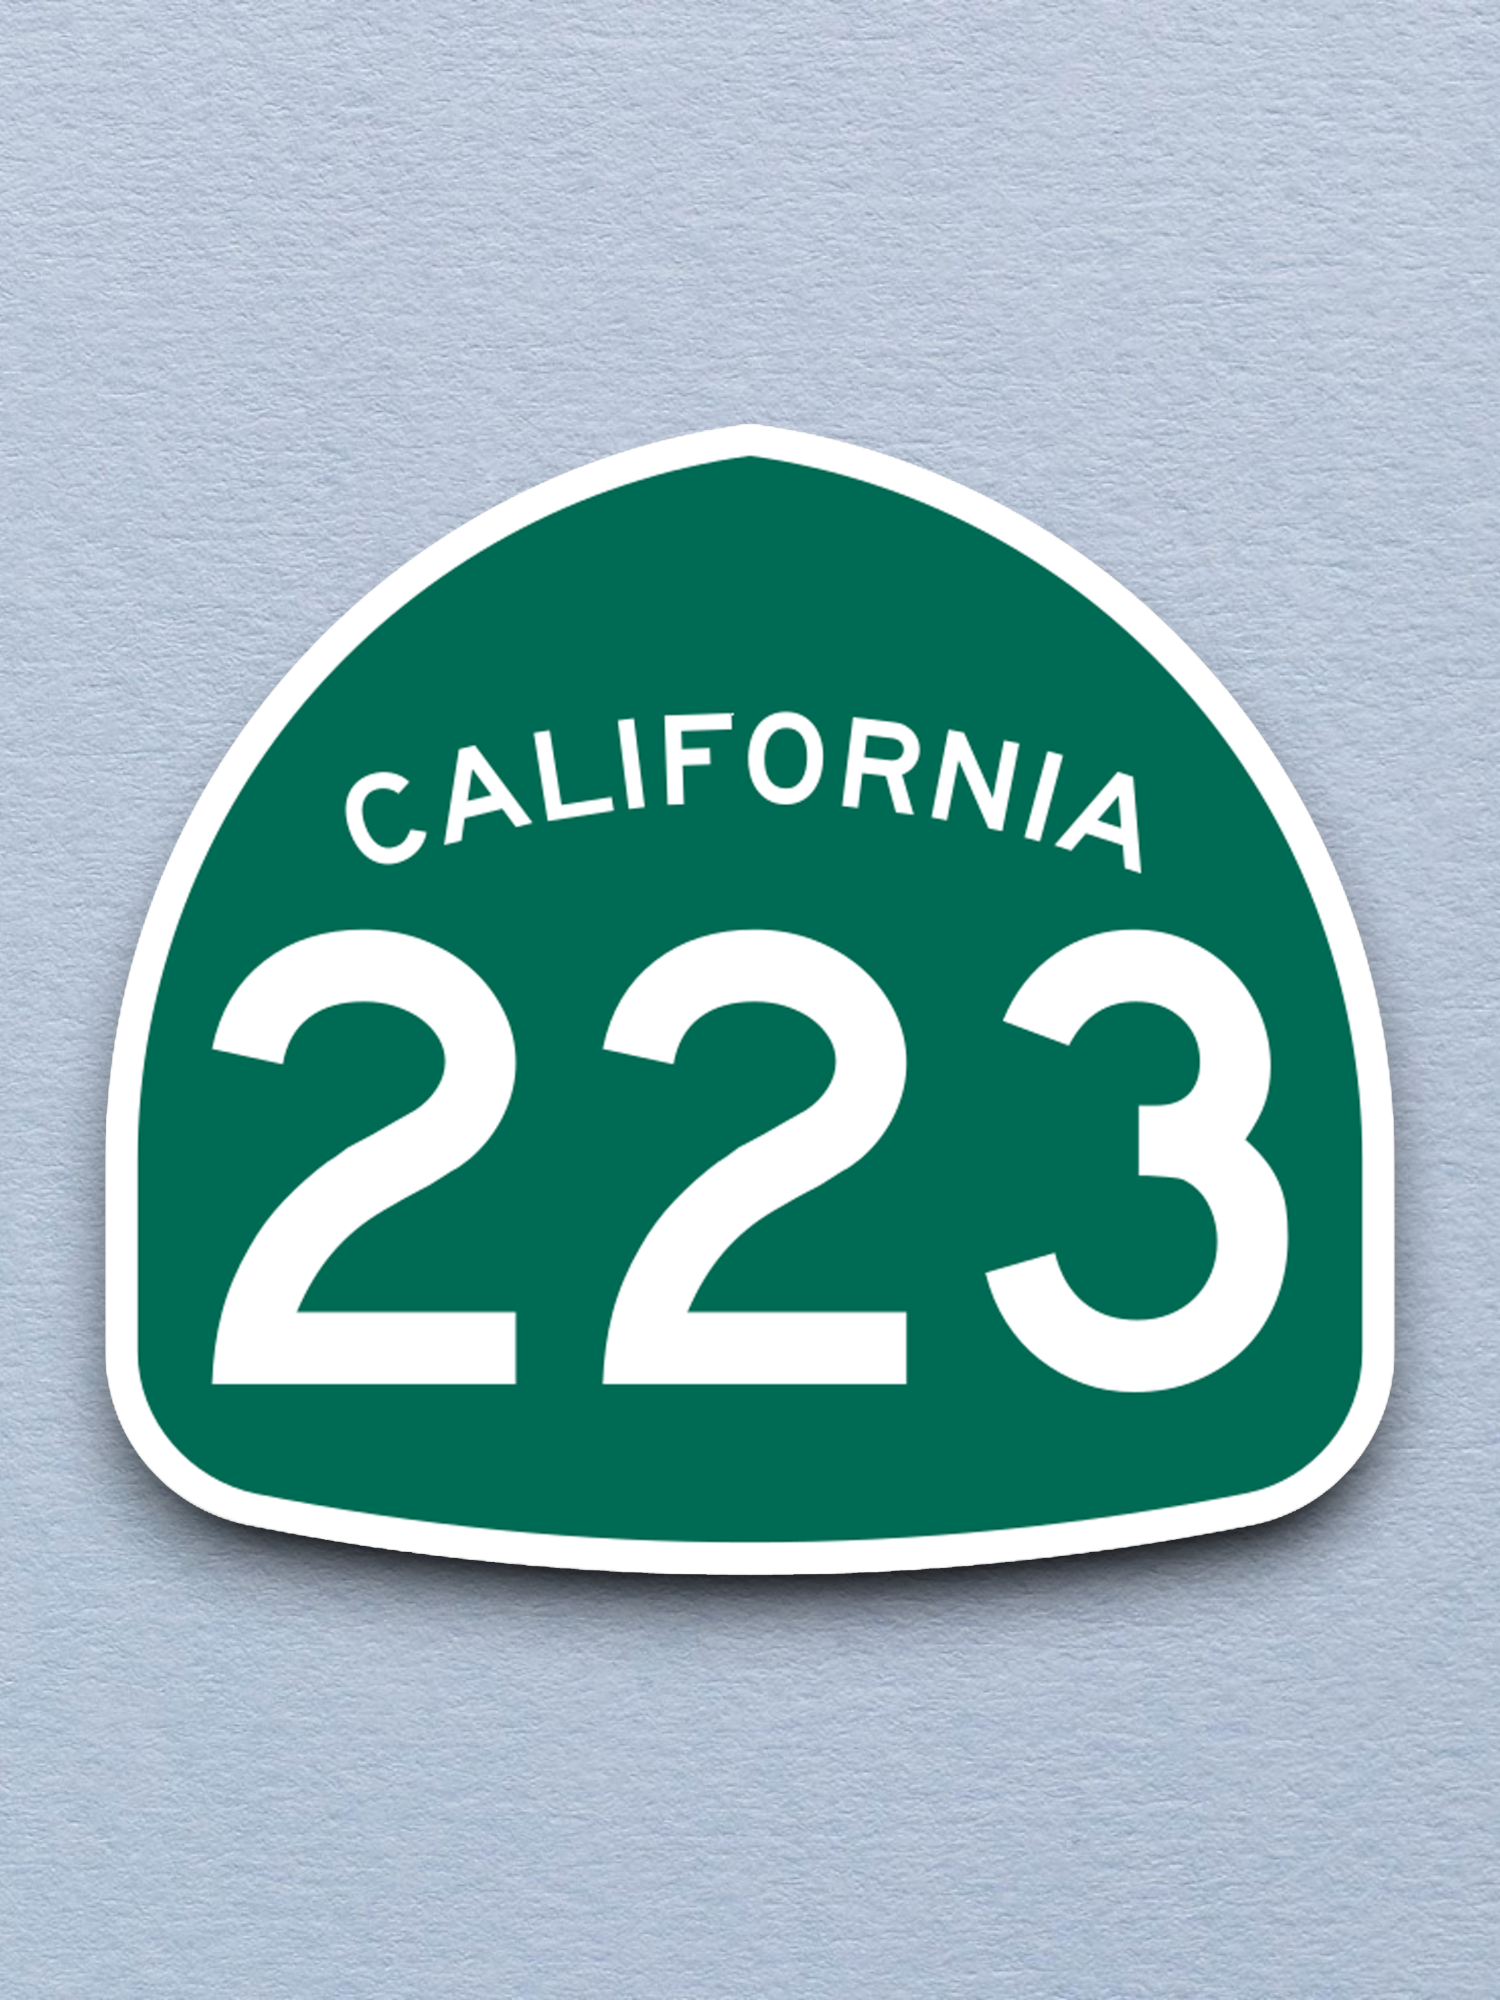 California State Route 223 Road Sign Sticker